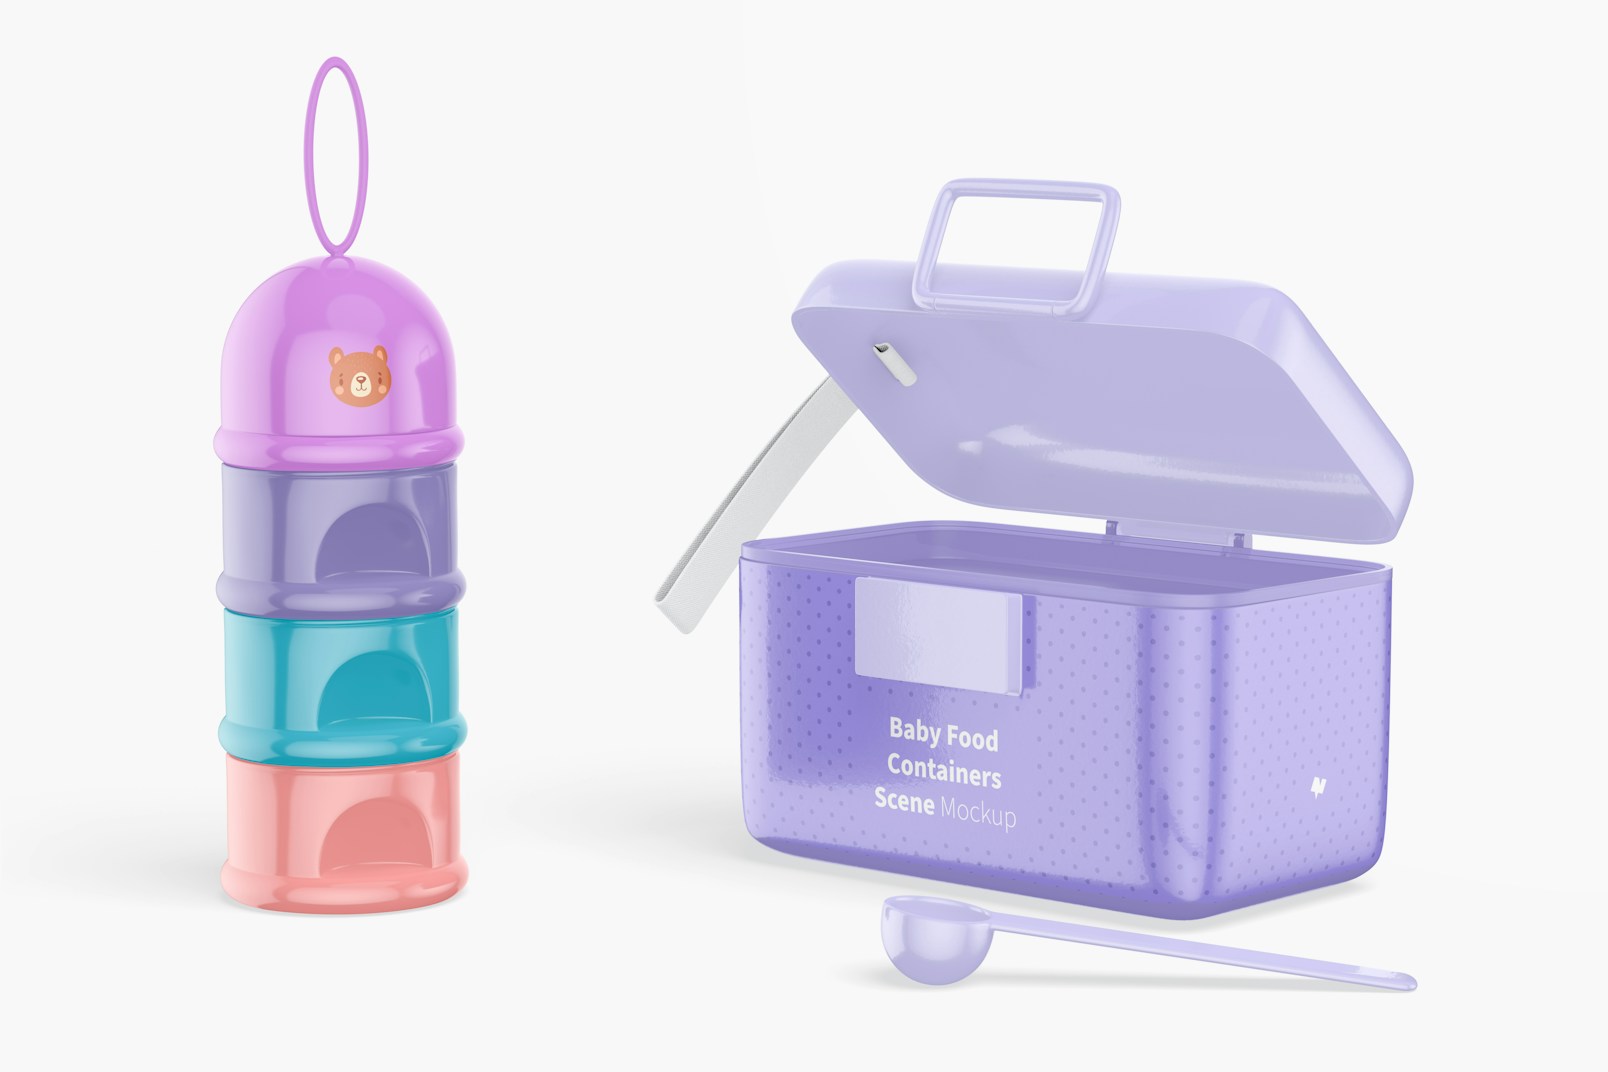 Baby Food Containers Scene Mockup